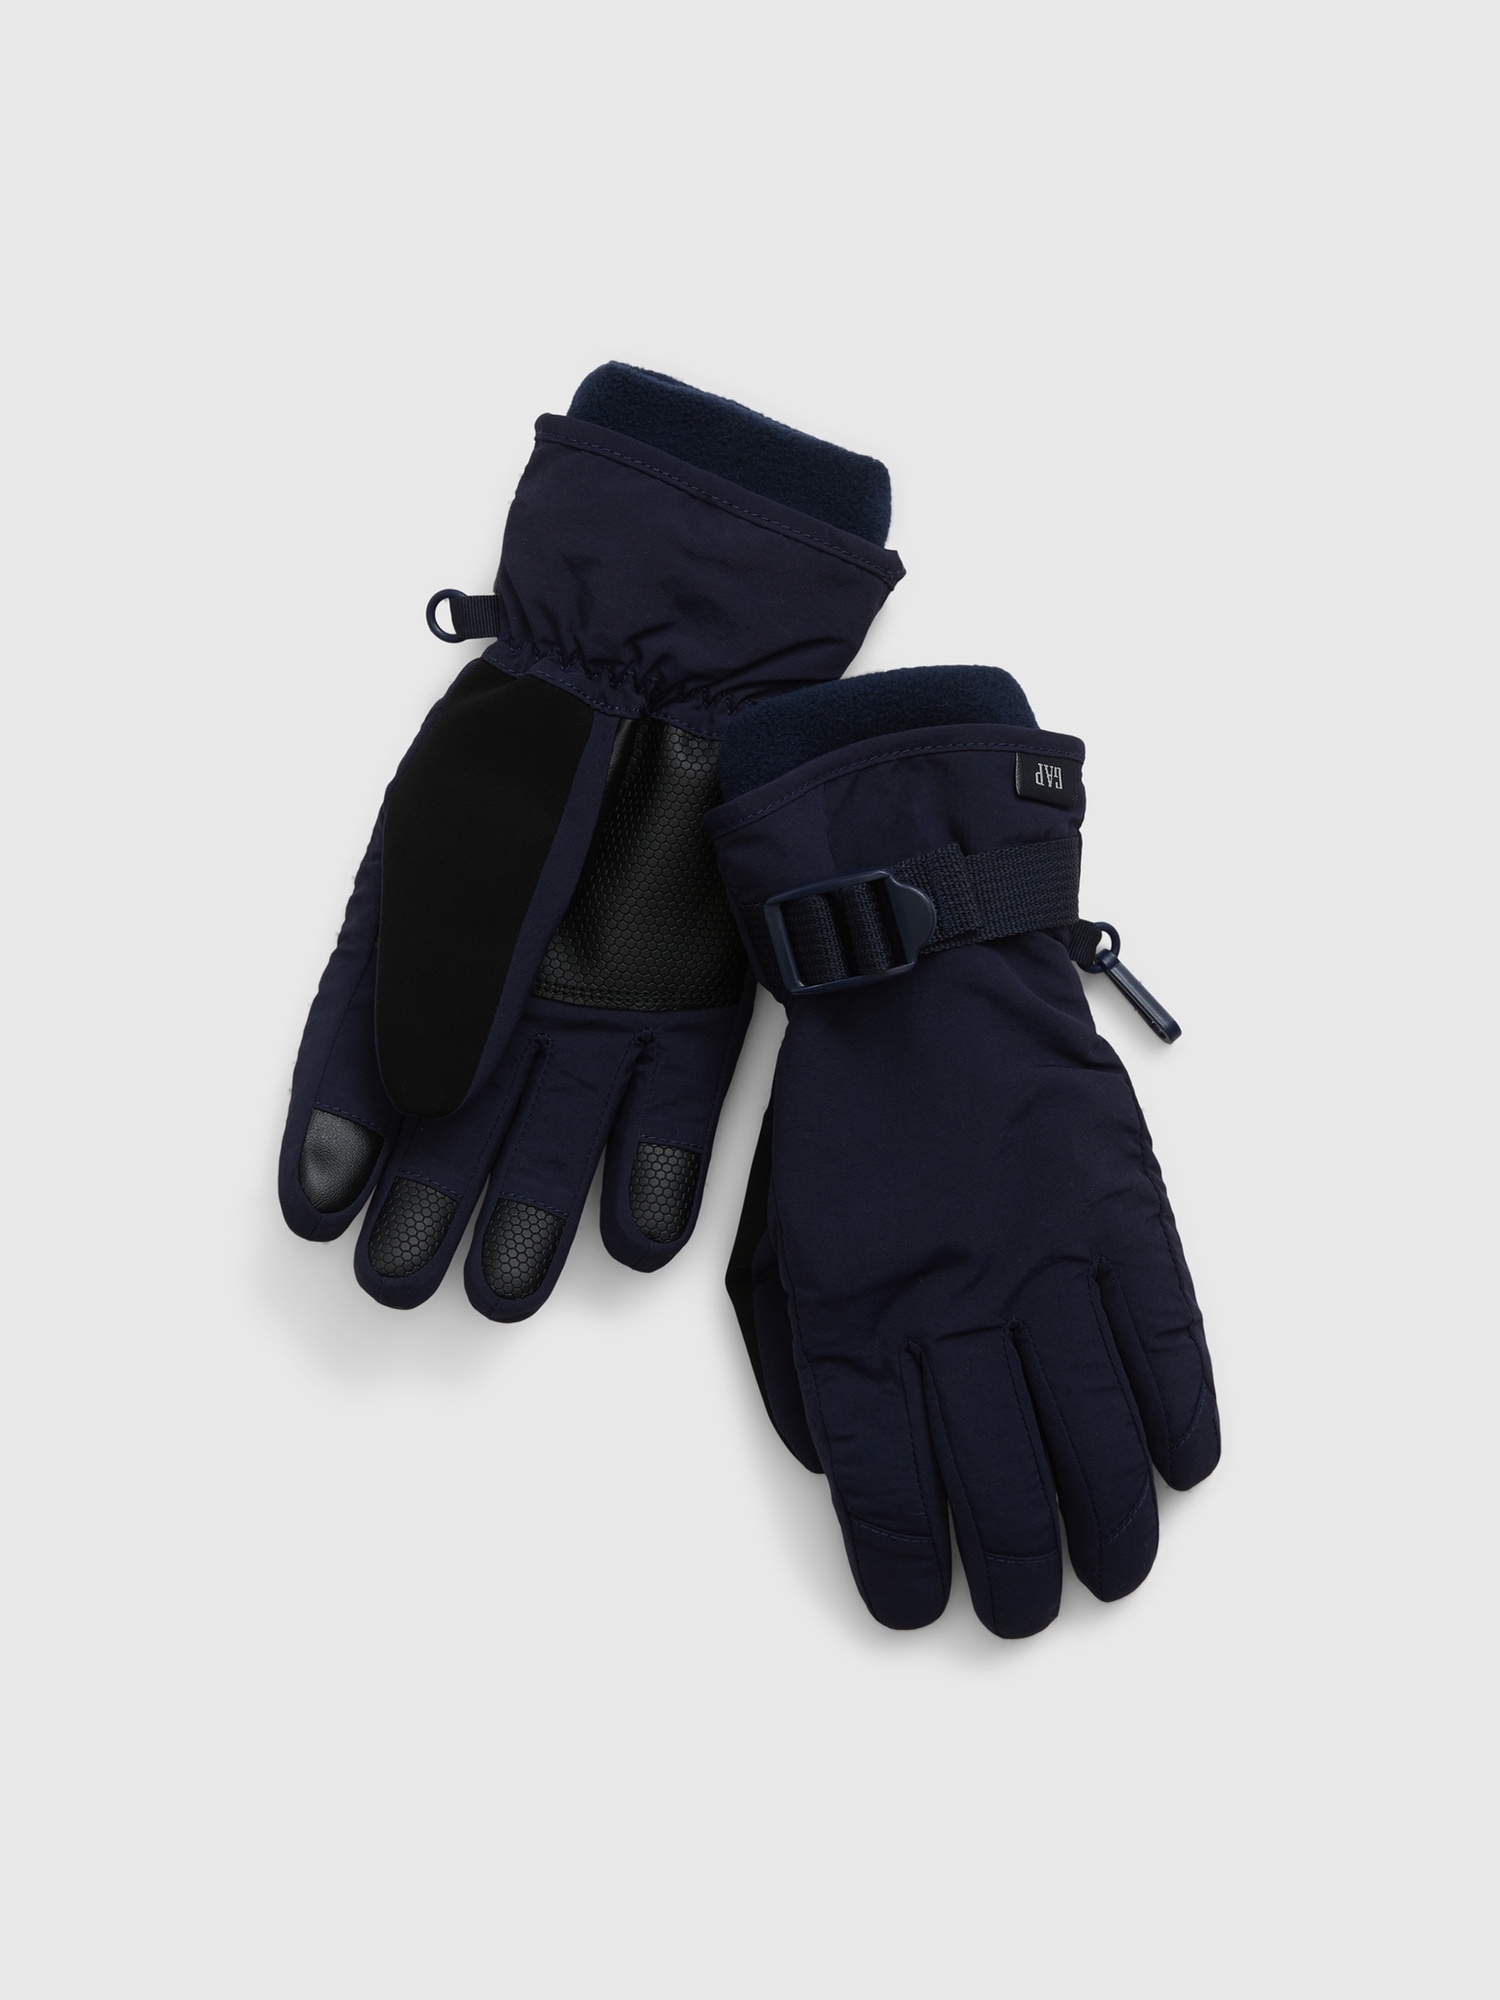 Gap Kids Recycled Snow Gloves